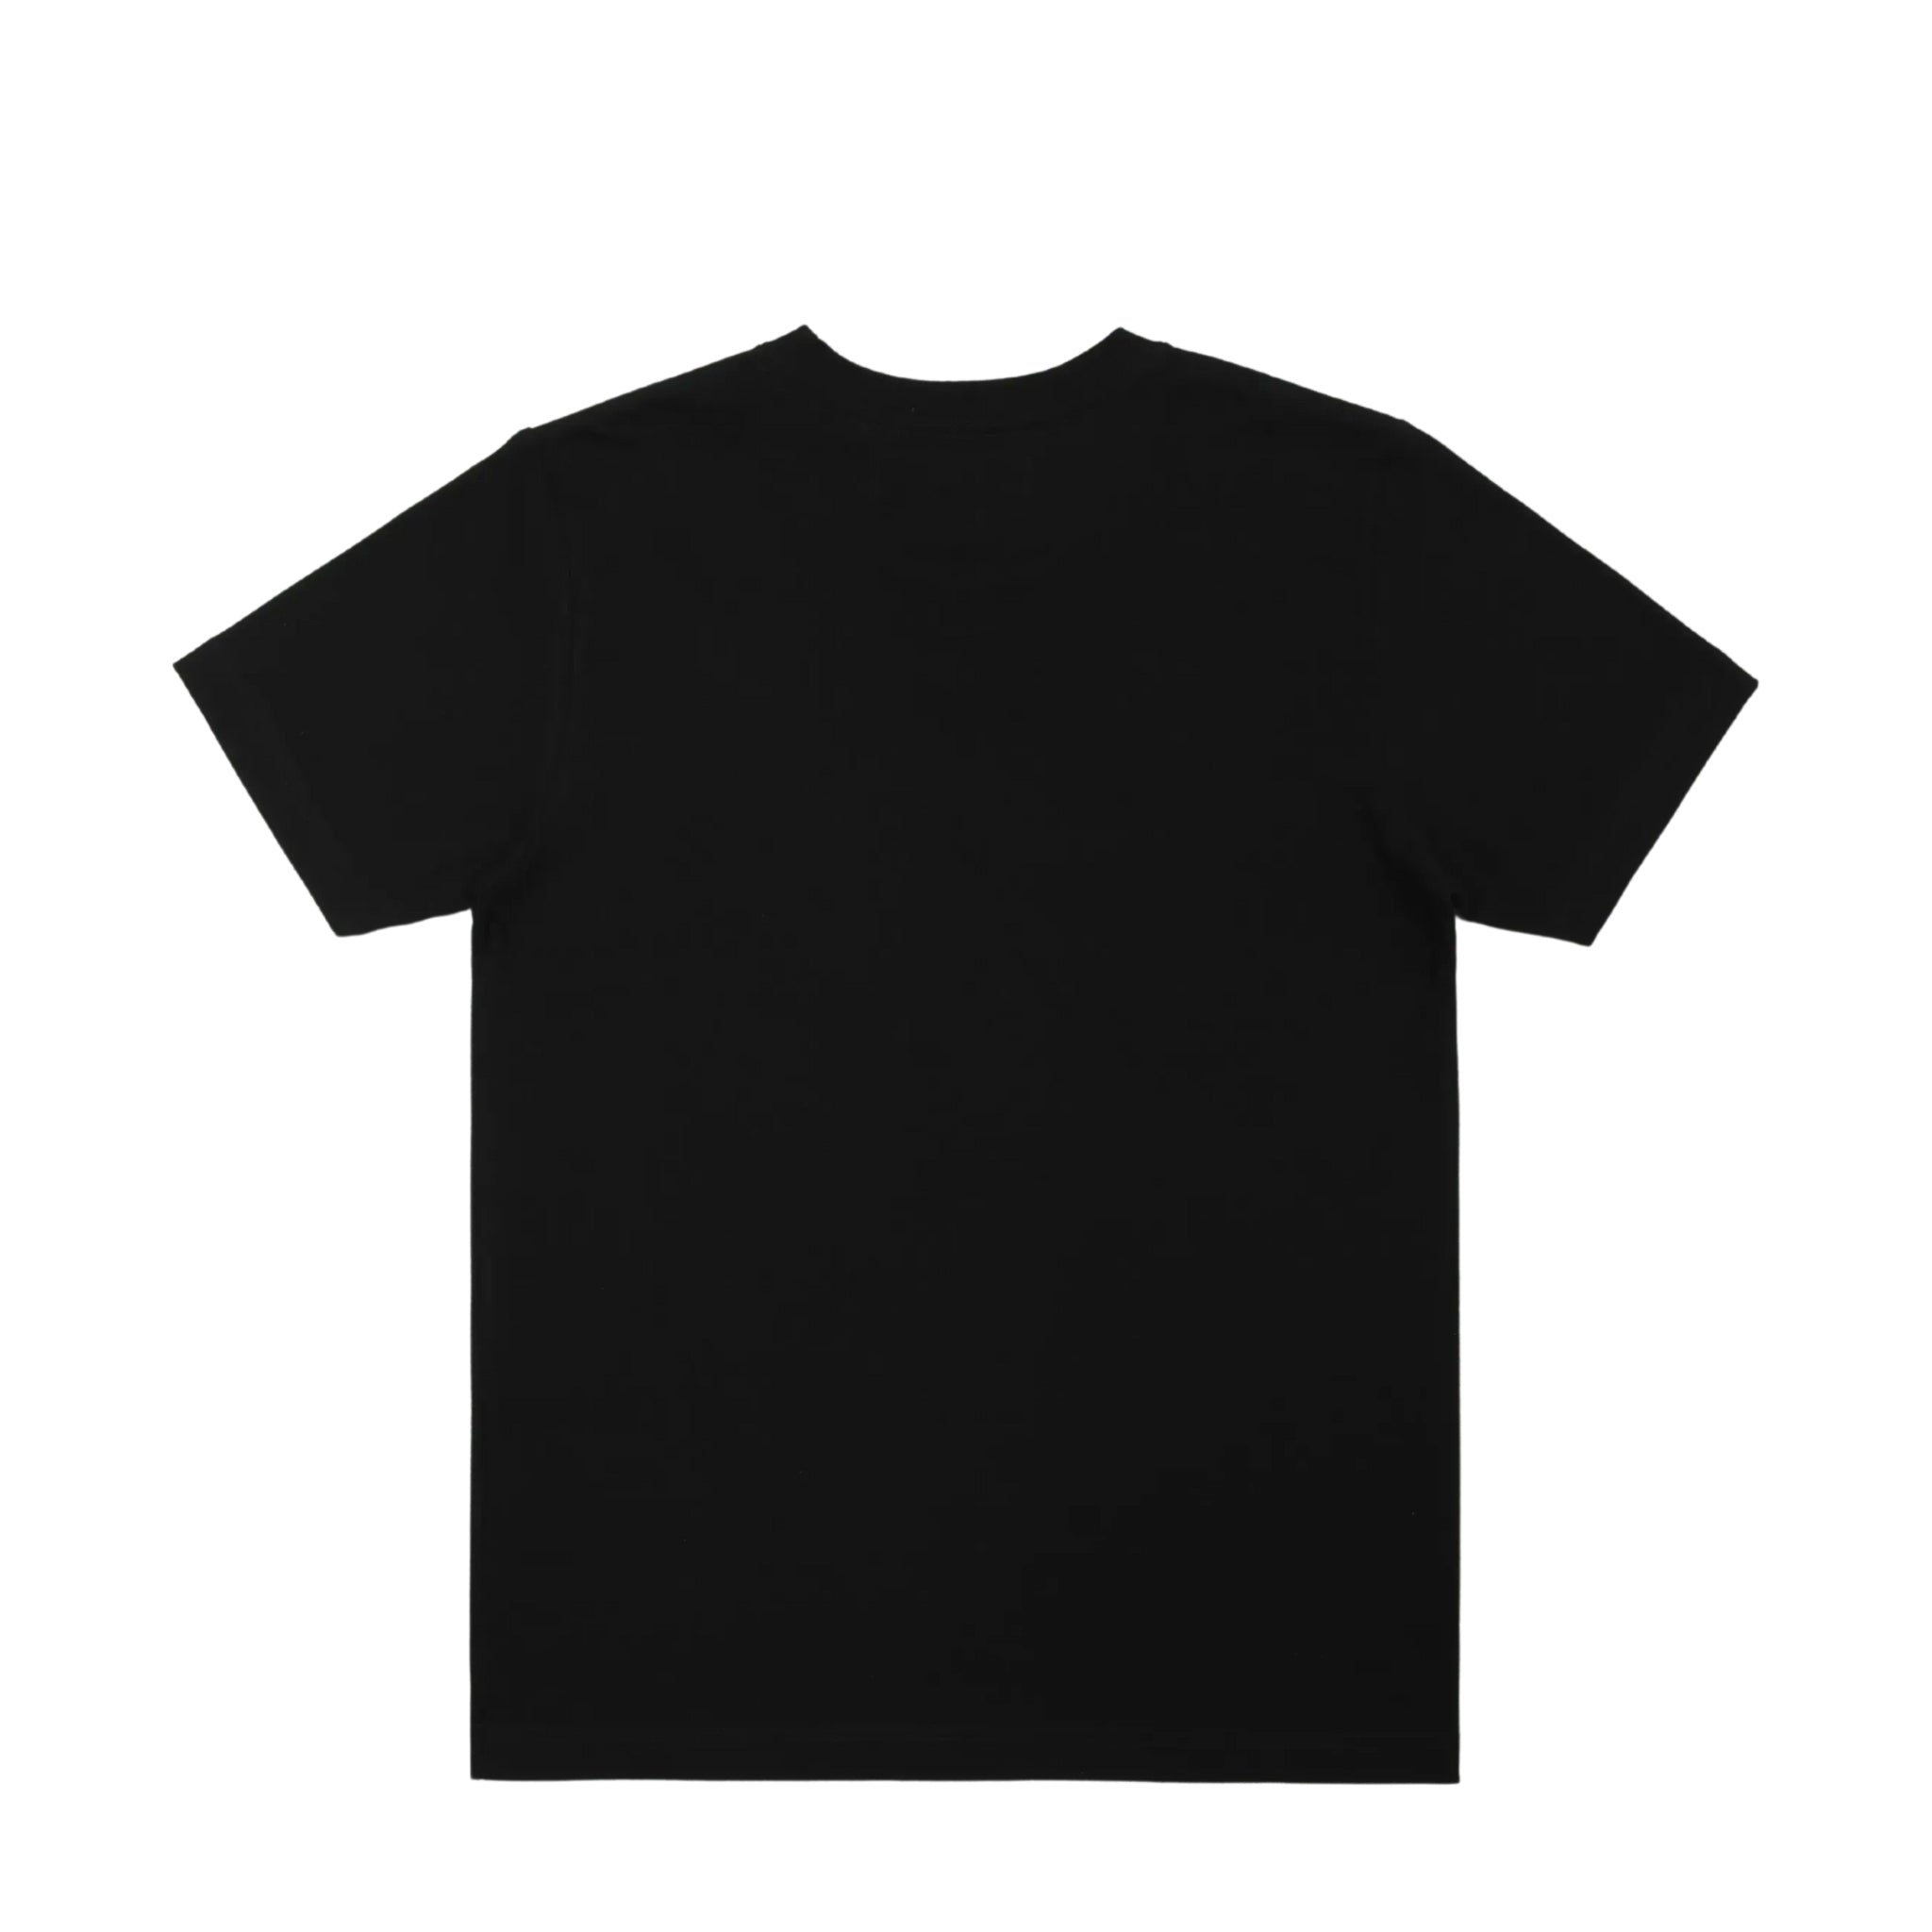 back view of a black cotton t-shirt against a white bkground.